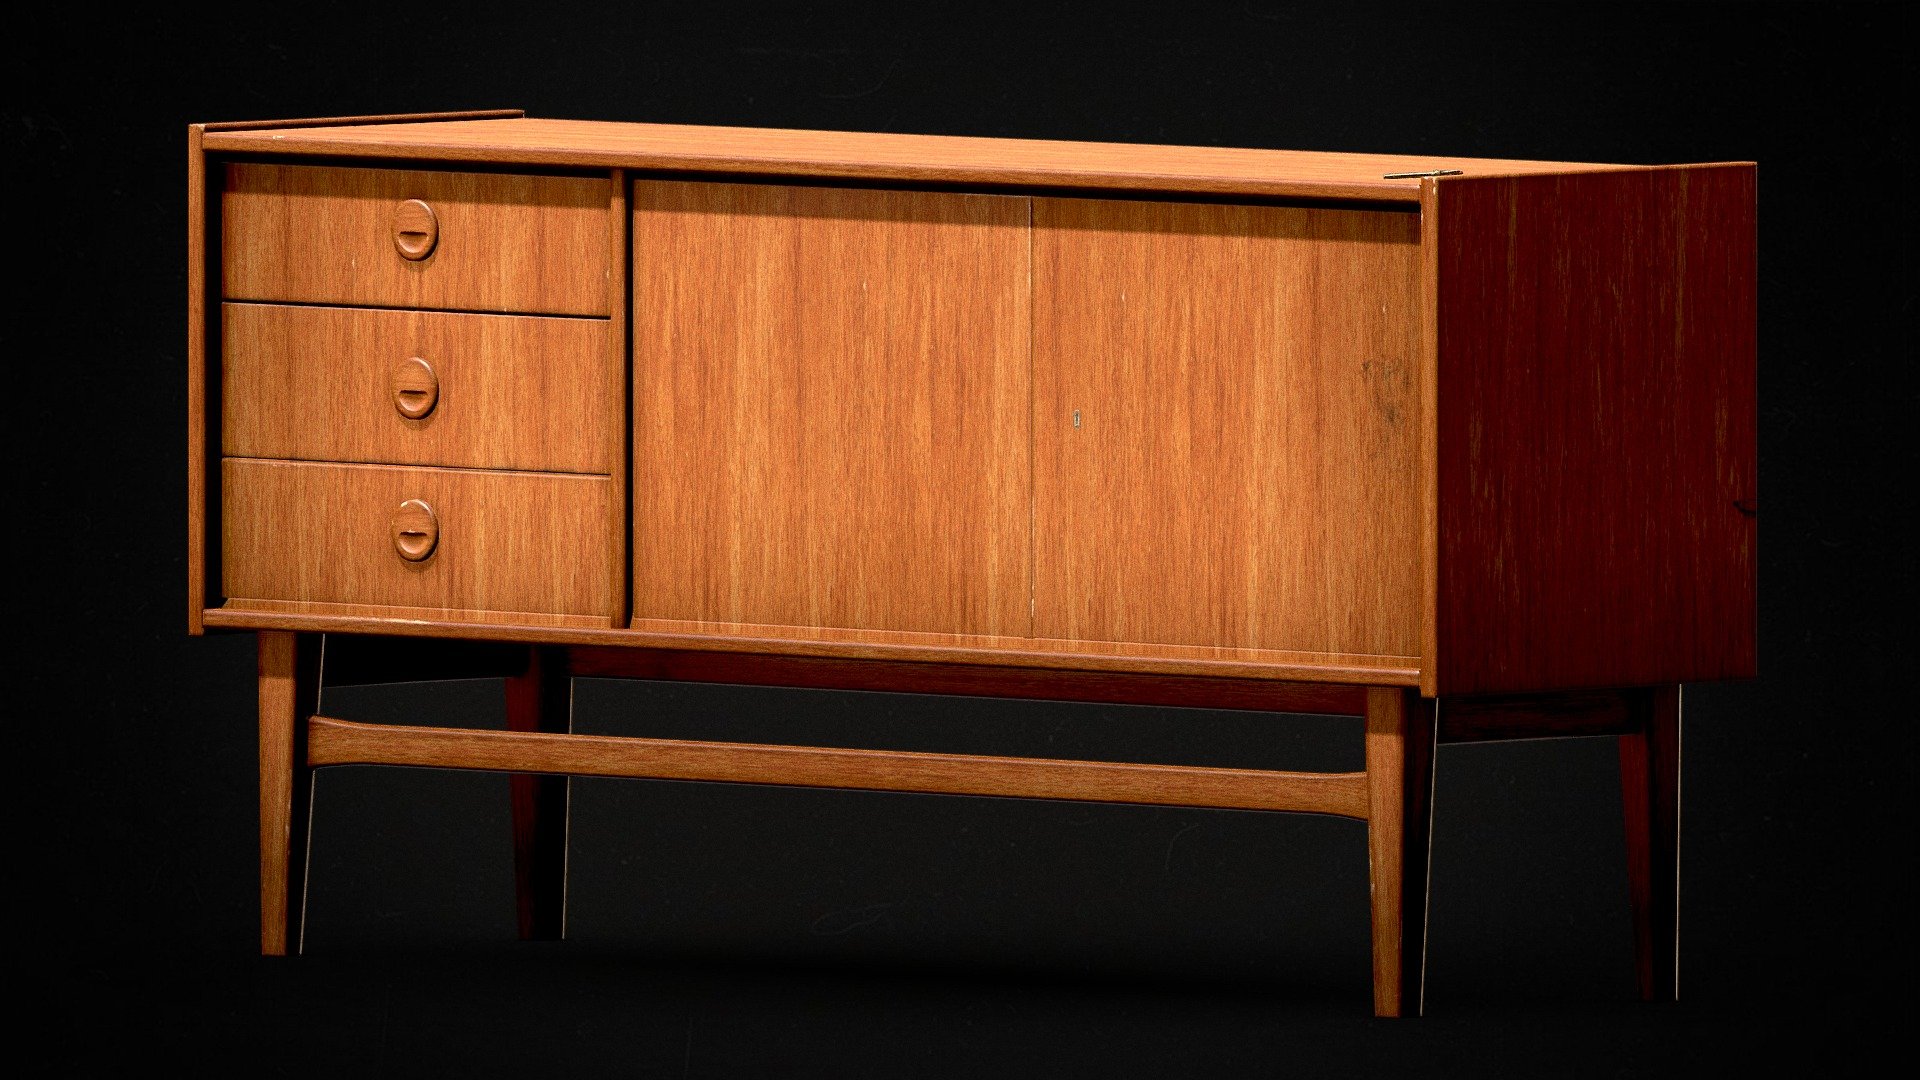 Game-ready optimized mid-century sideboard. Can be used for real-time applications, archviz, etc.

Sideboard can't be opened. Includes a key model 3d model